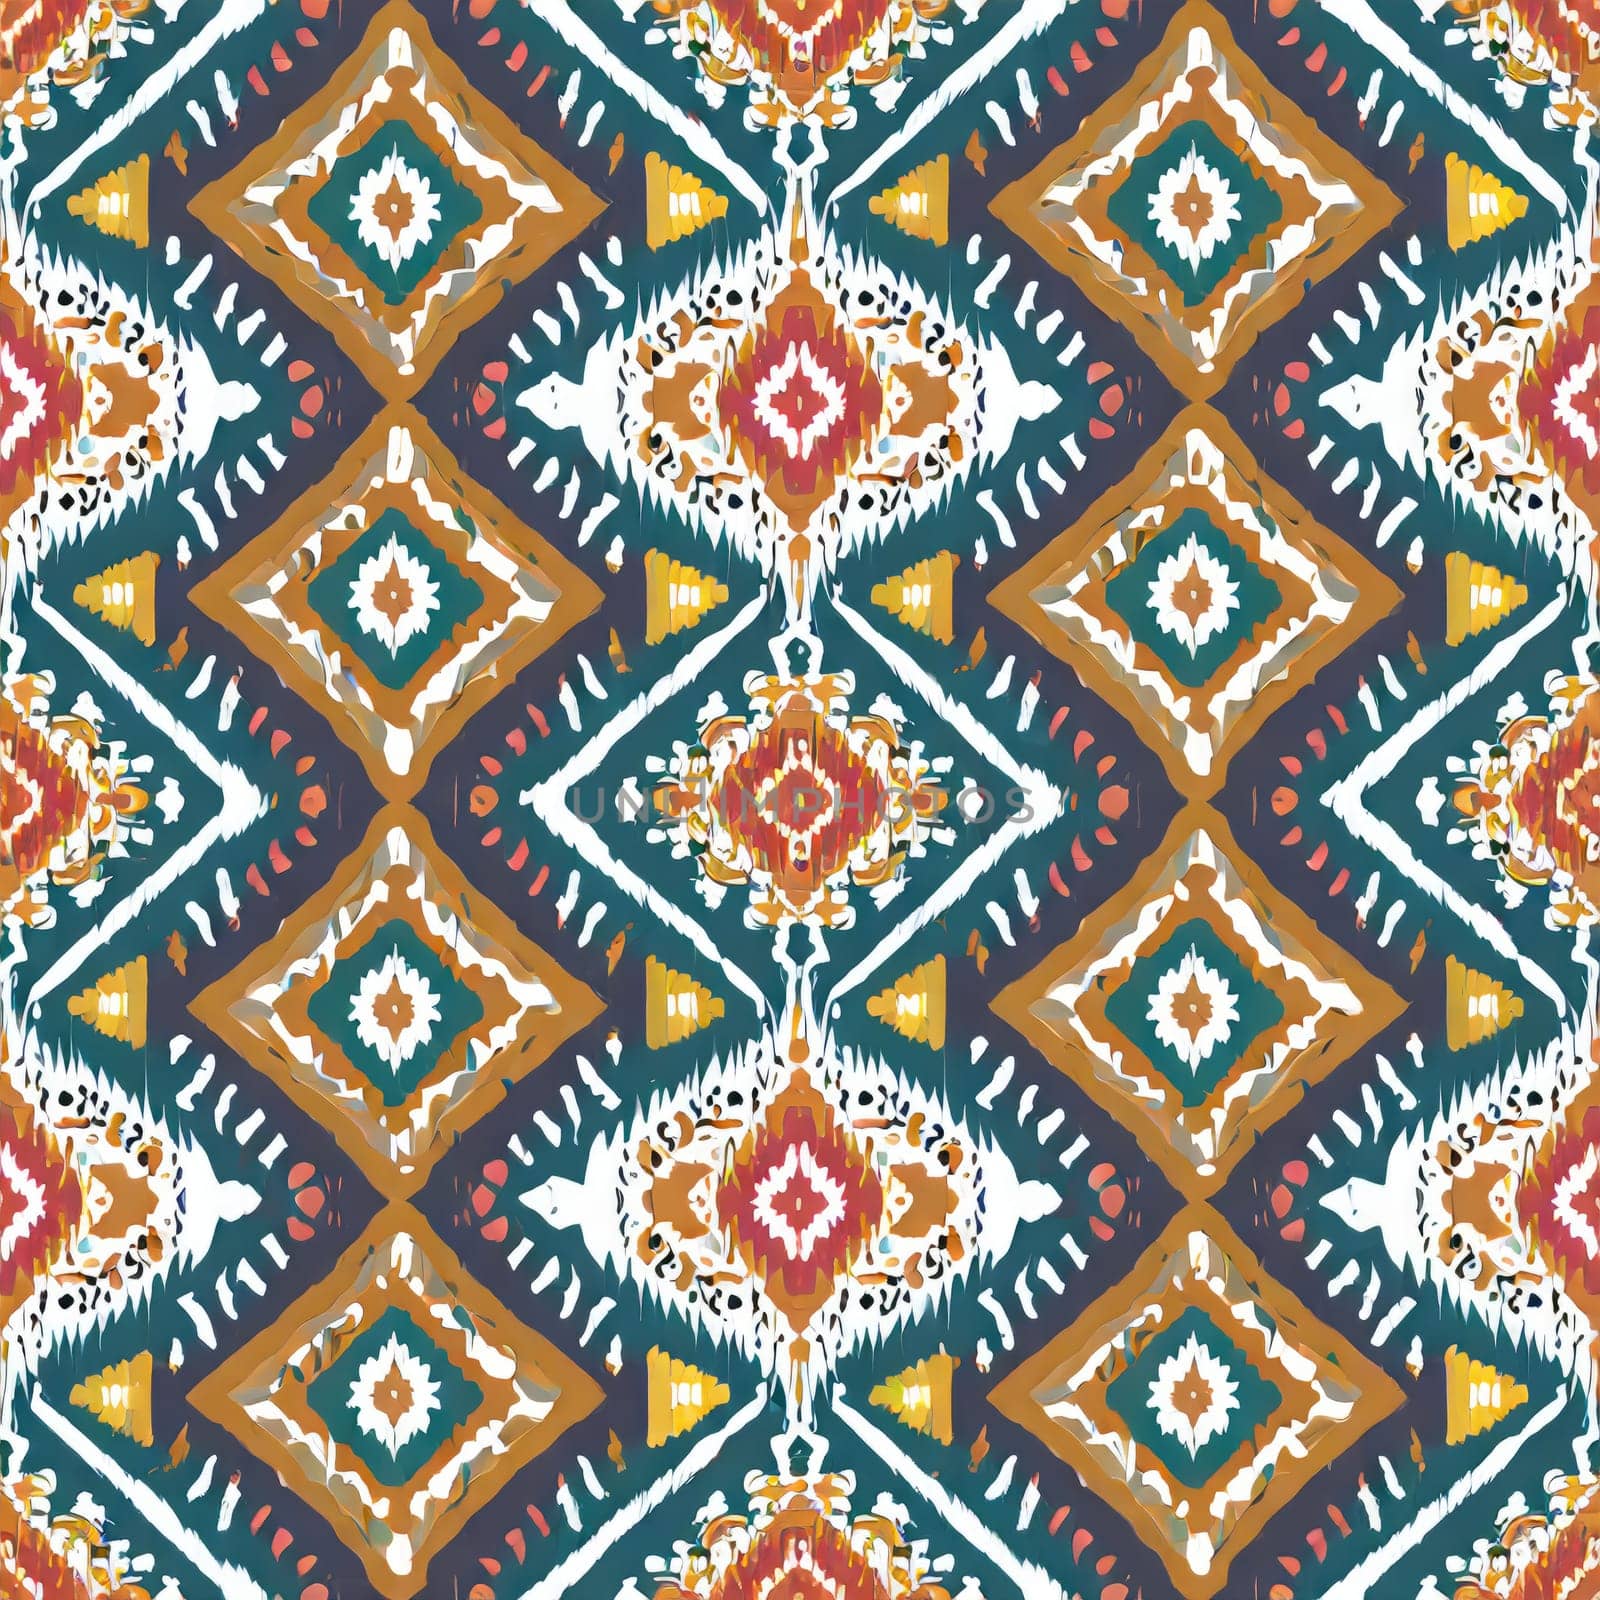 Seamless ikat pattern background elements. Grunge textured textile print and wallpaper, ethnic design for cards